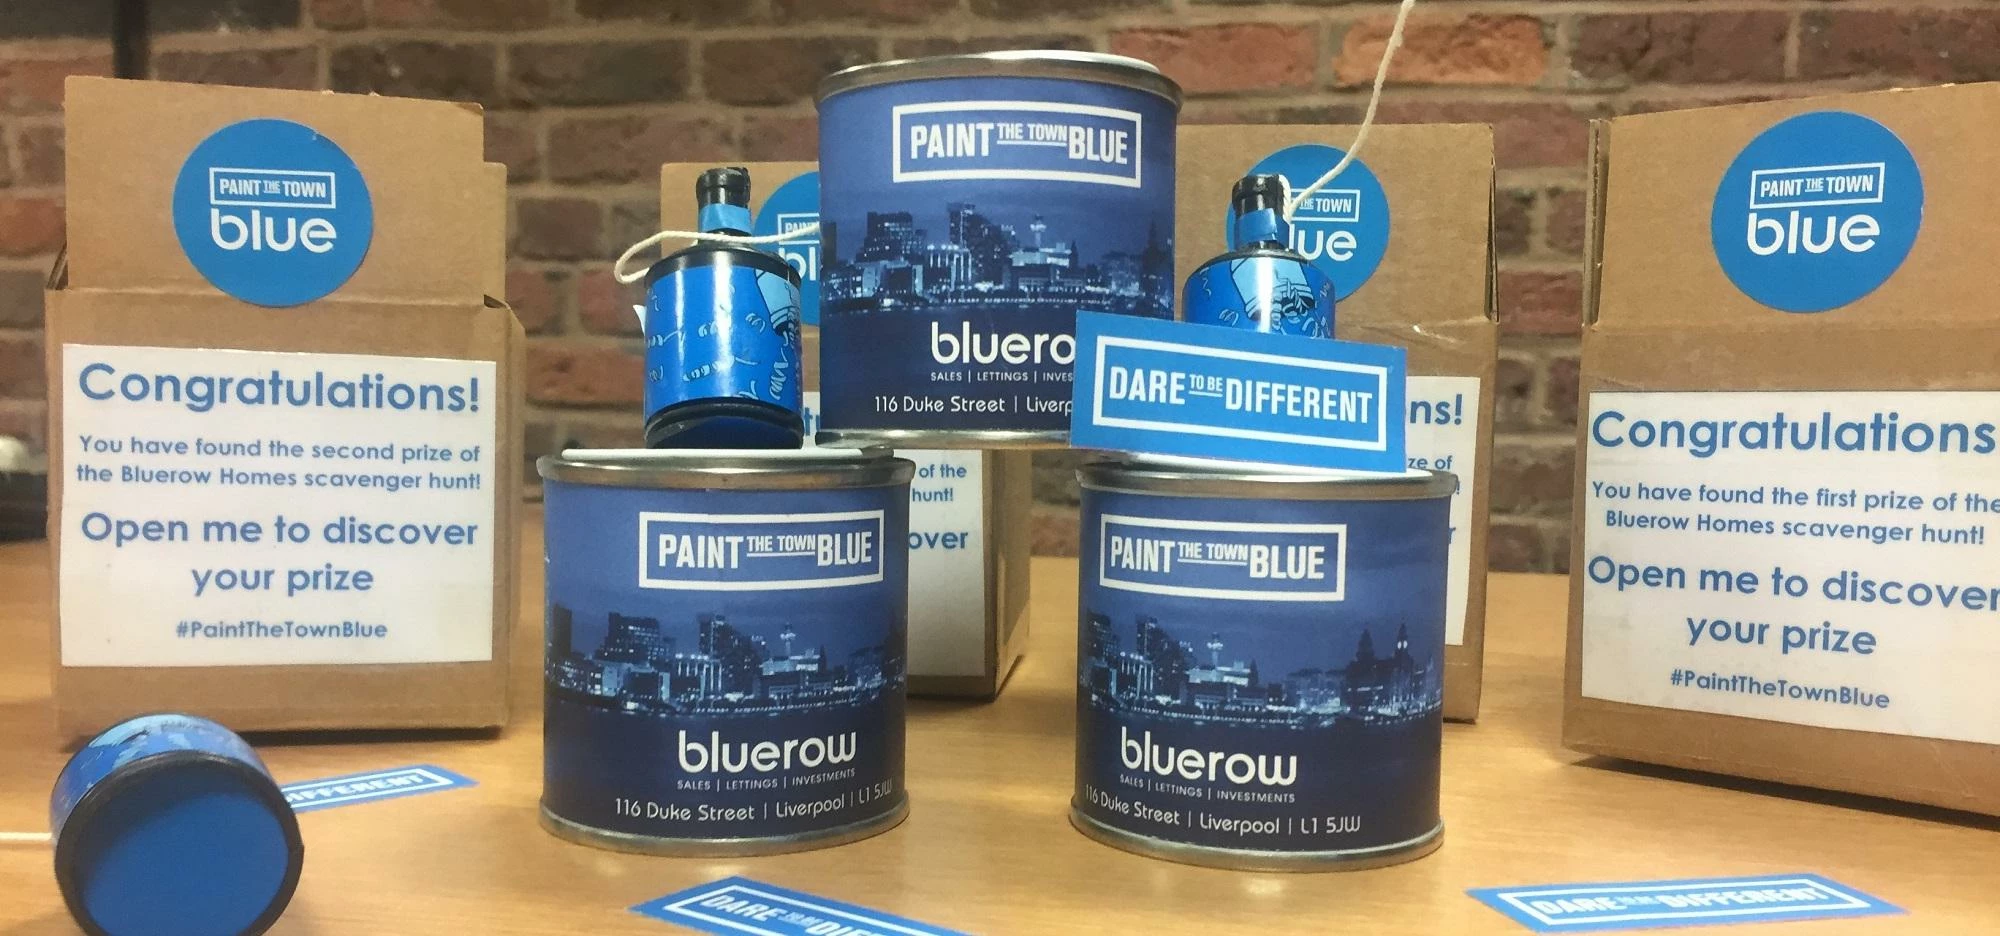 The winning paint tins participants need to look for